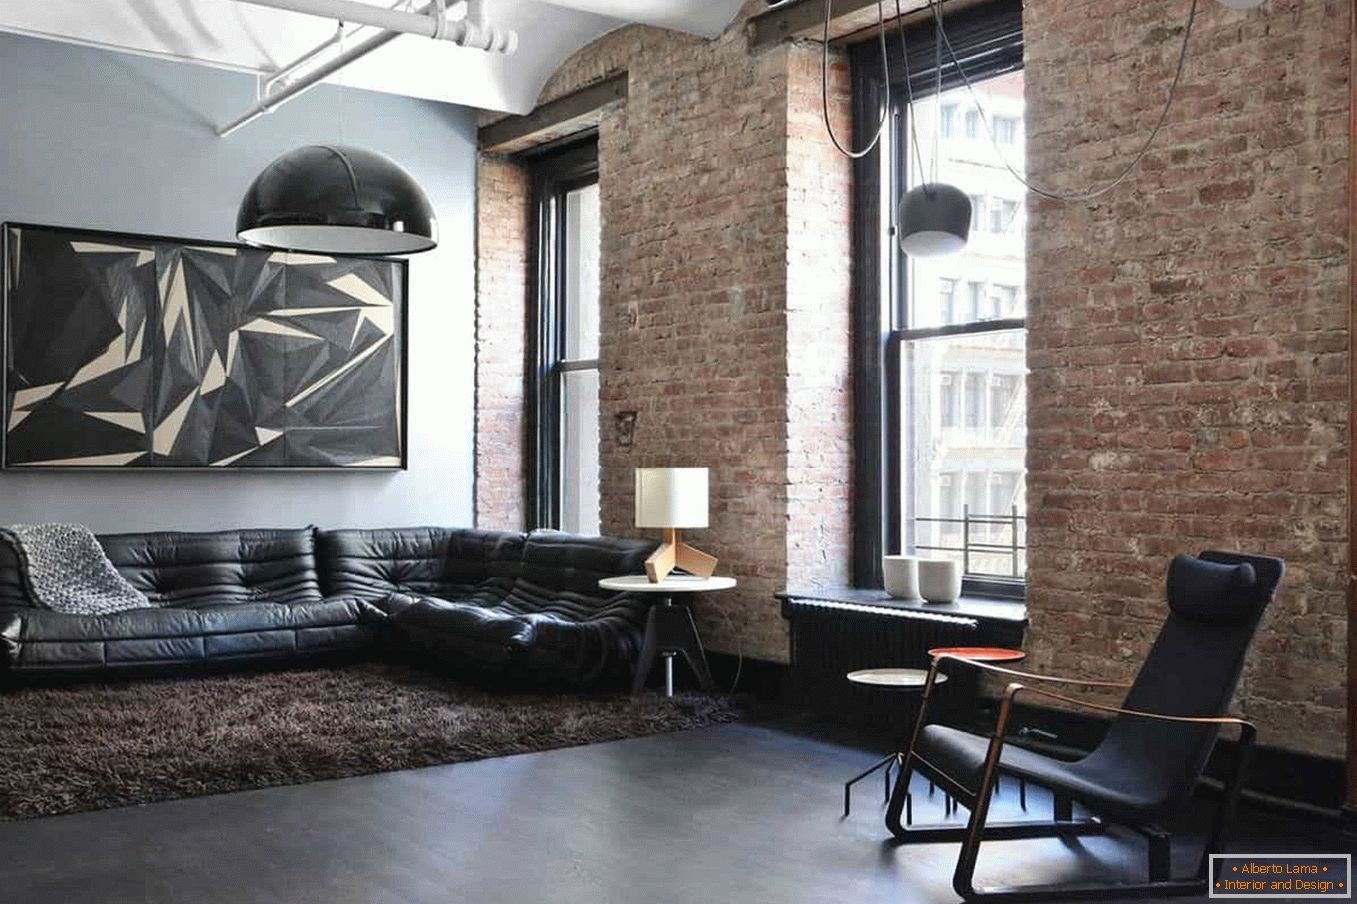 The combination of painted and brick walls in the living room in the style of grunge